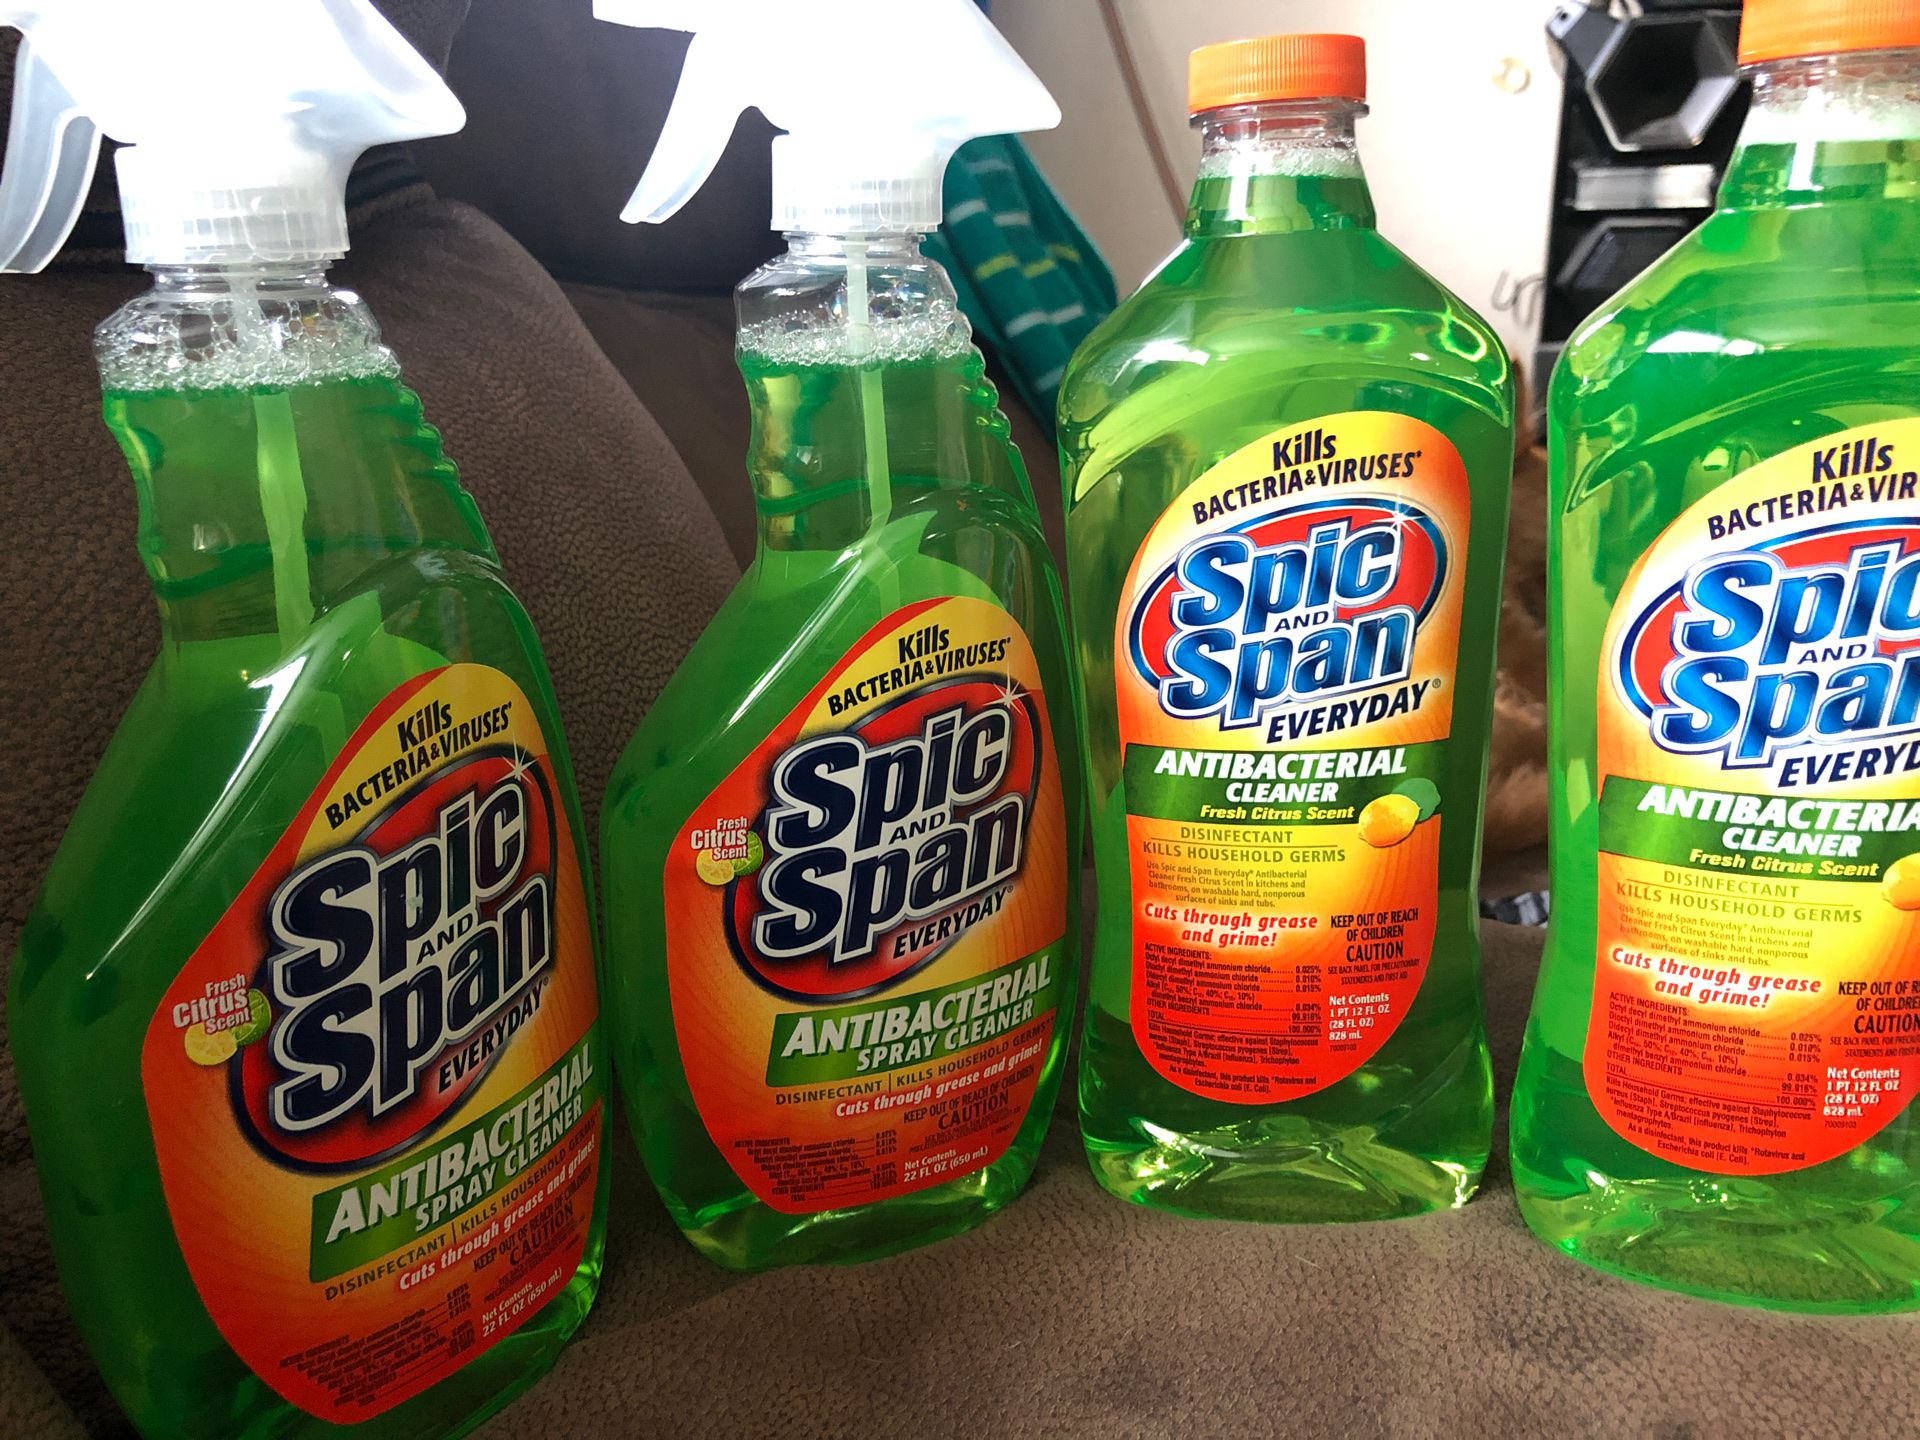 Spic and Span Antibacterial Cleaner